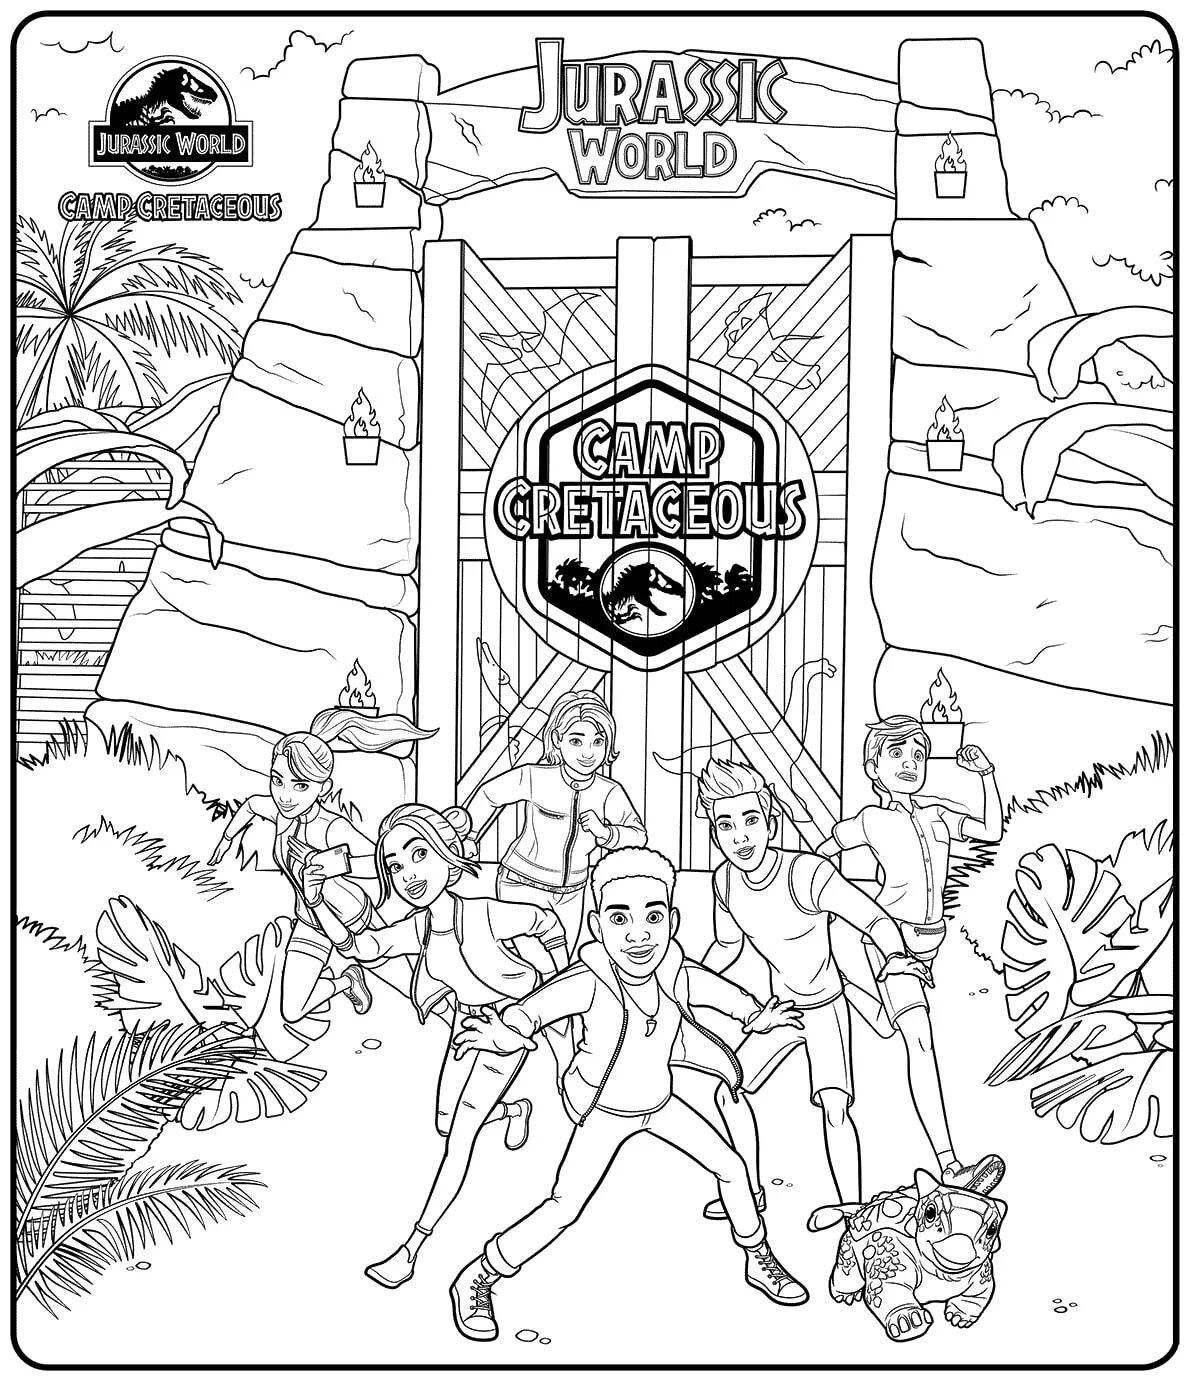 Colorful Jurassic world domination coloring page